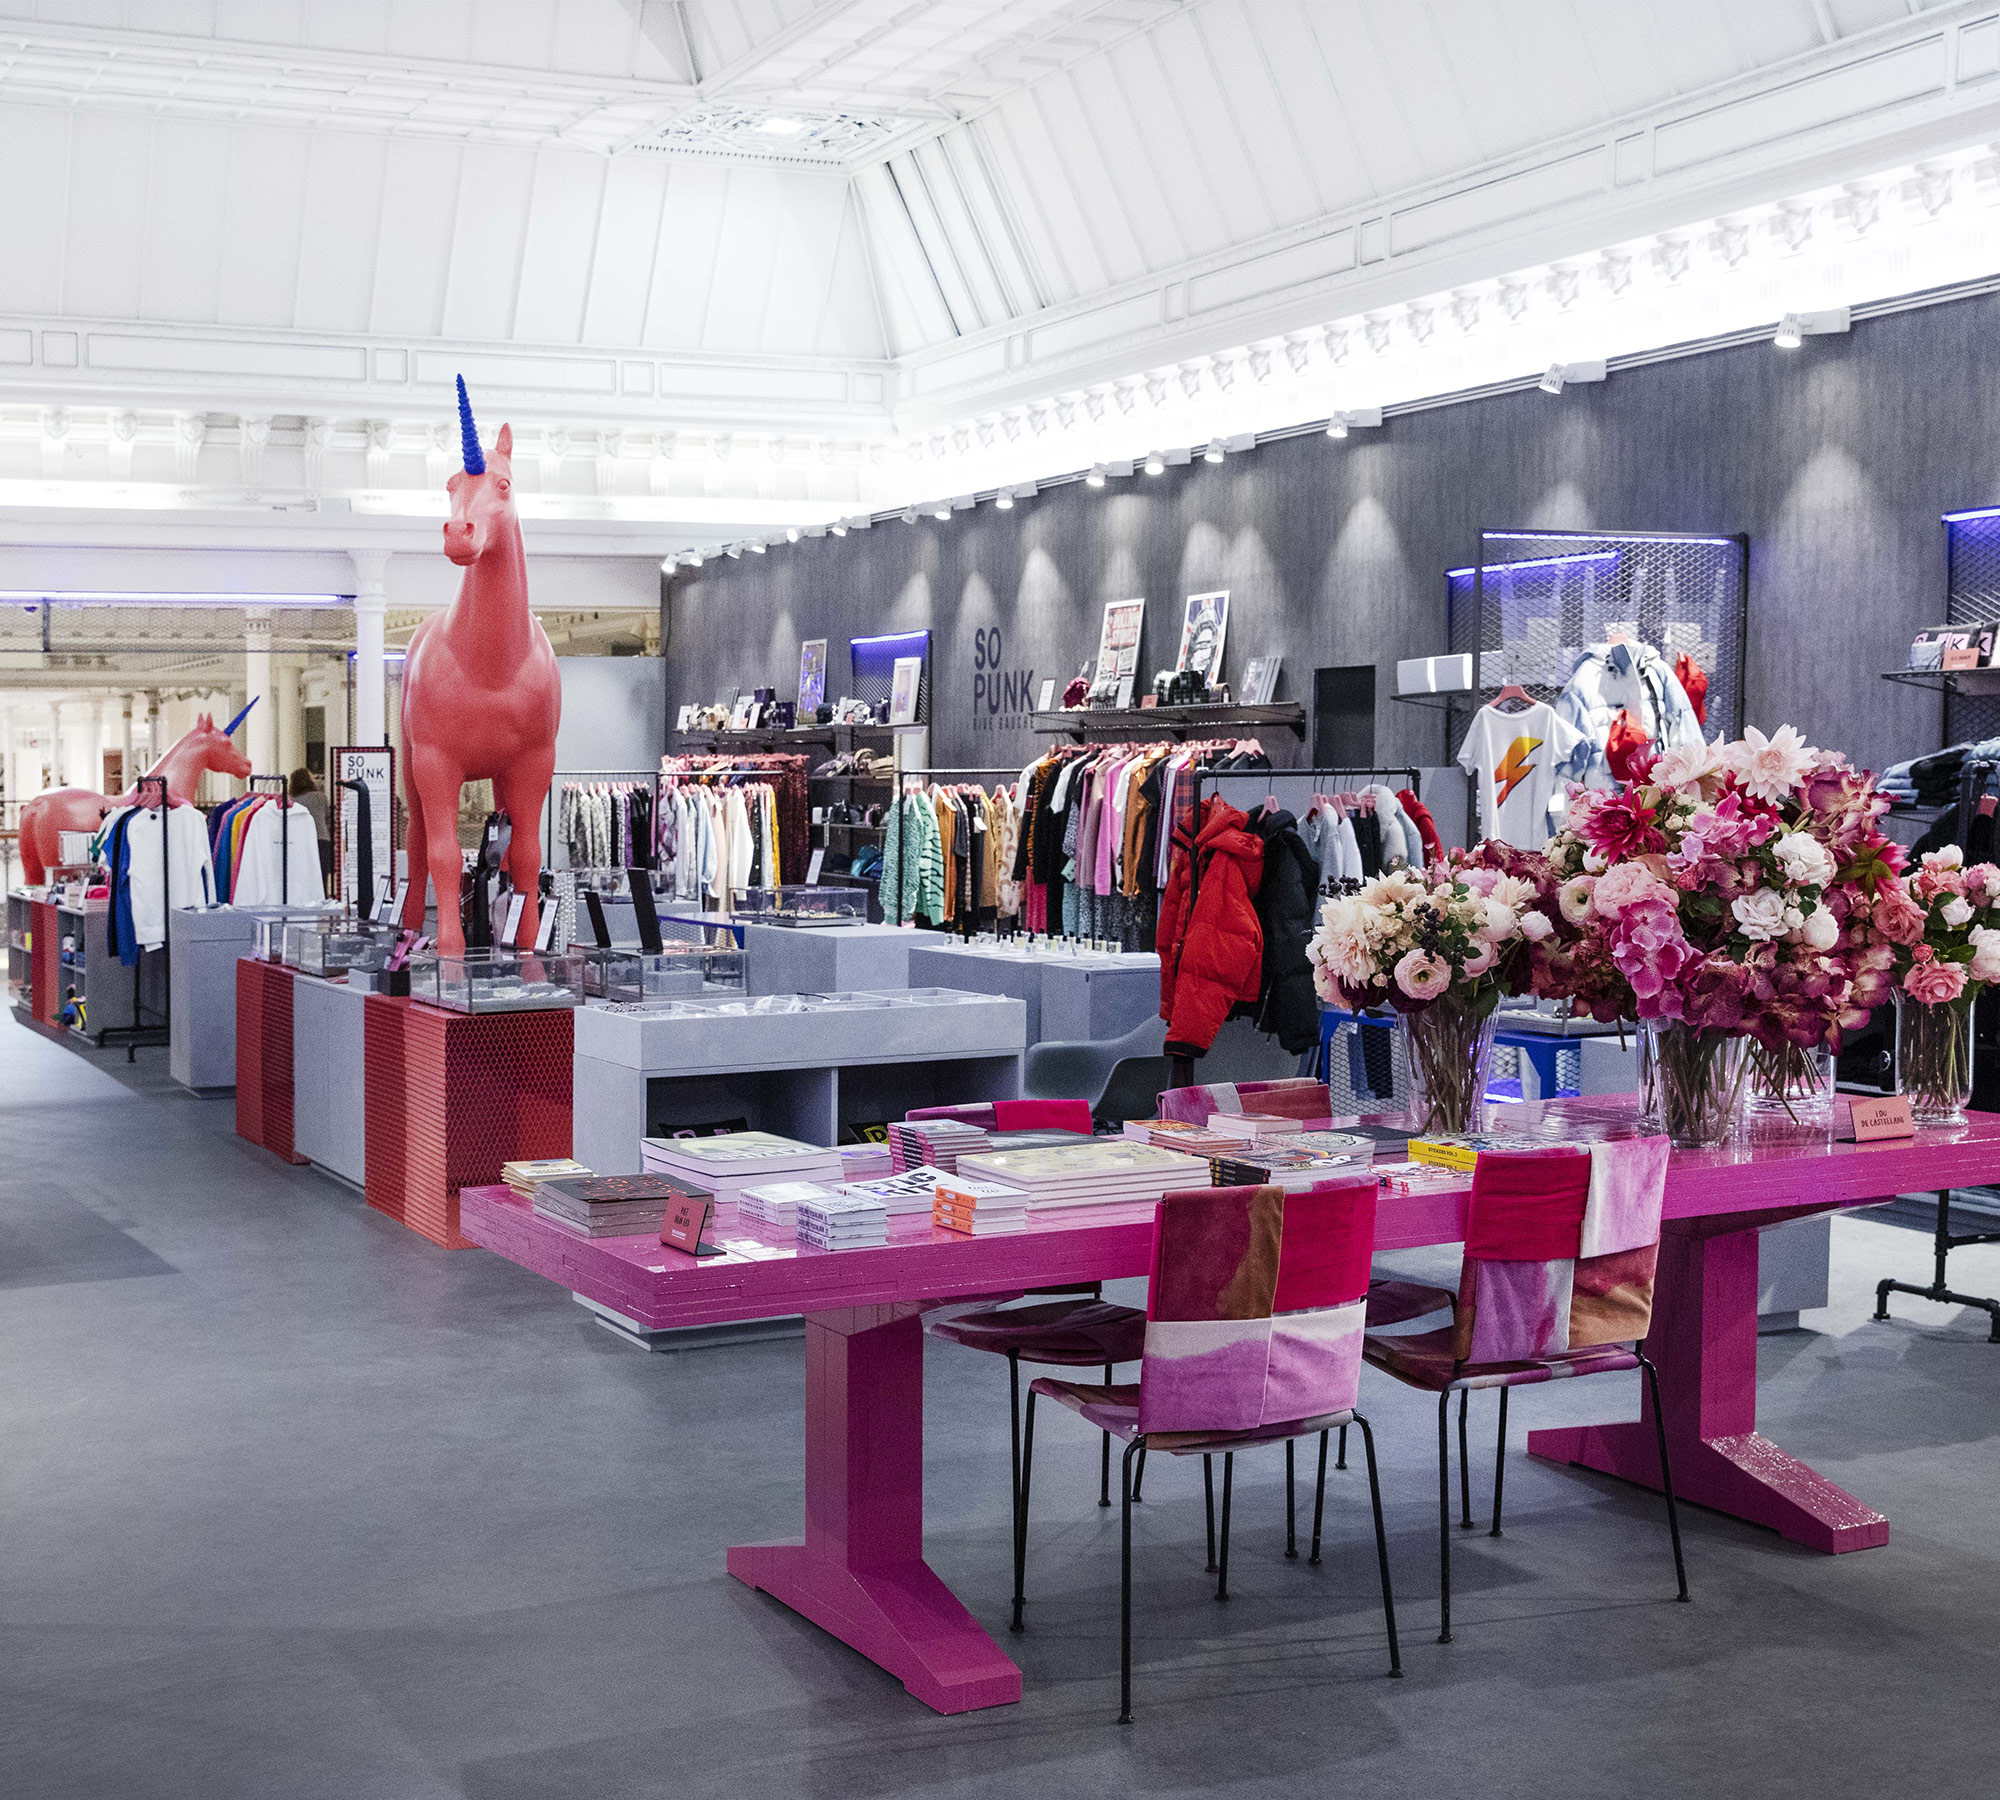 DISCOVER THE DELVAUX POP-UP AT THE BON MARCHÉ